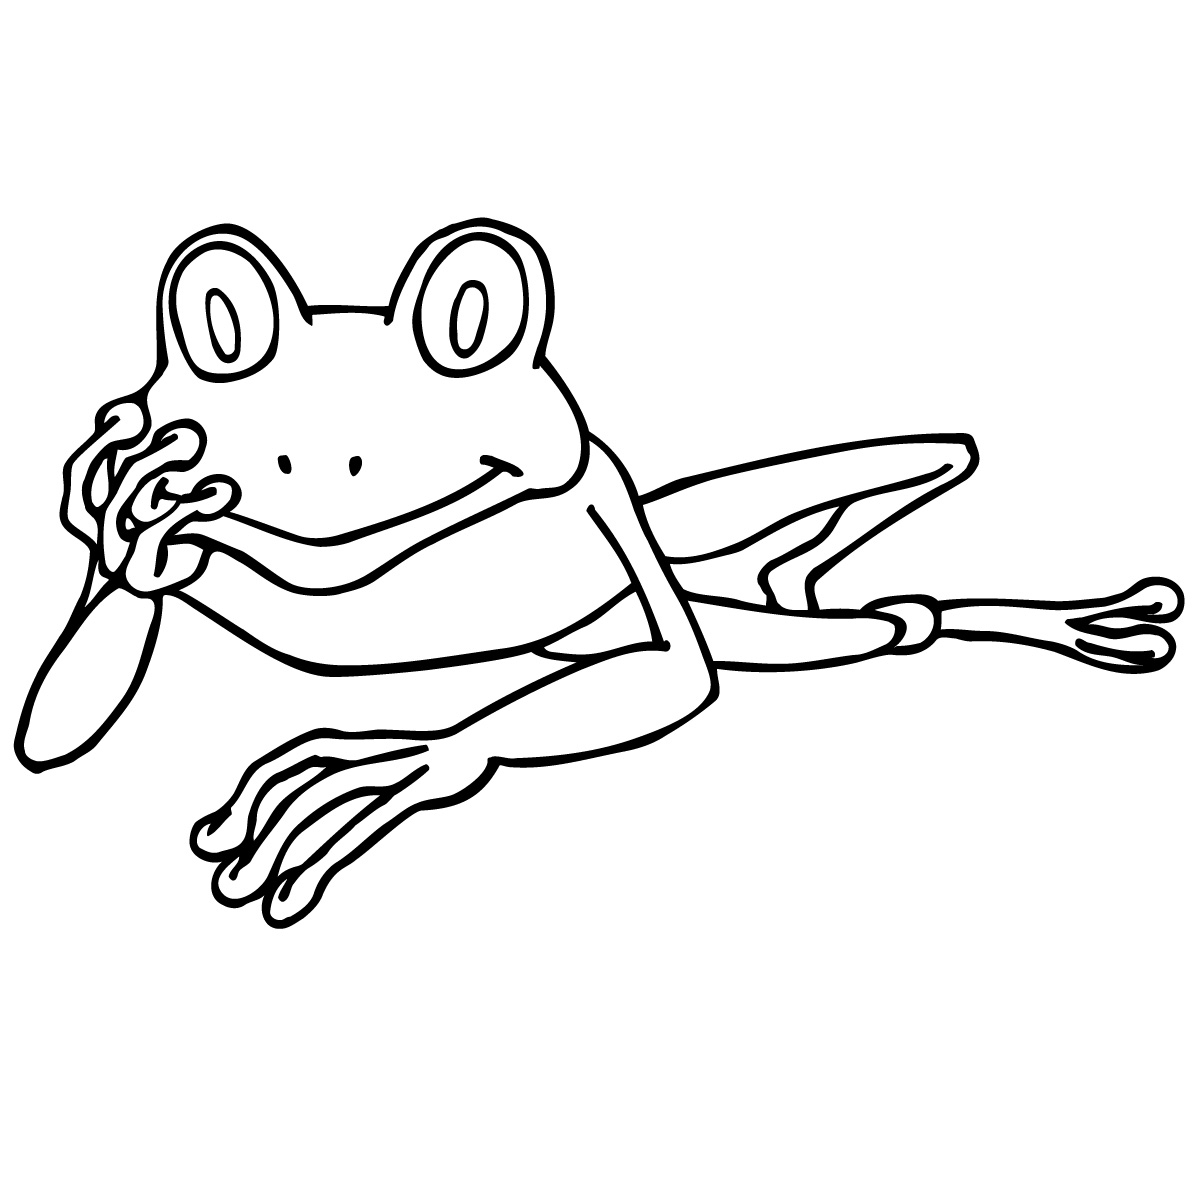 Frog  black and white tree frog clip art black and white free clipart 3